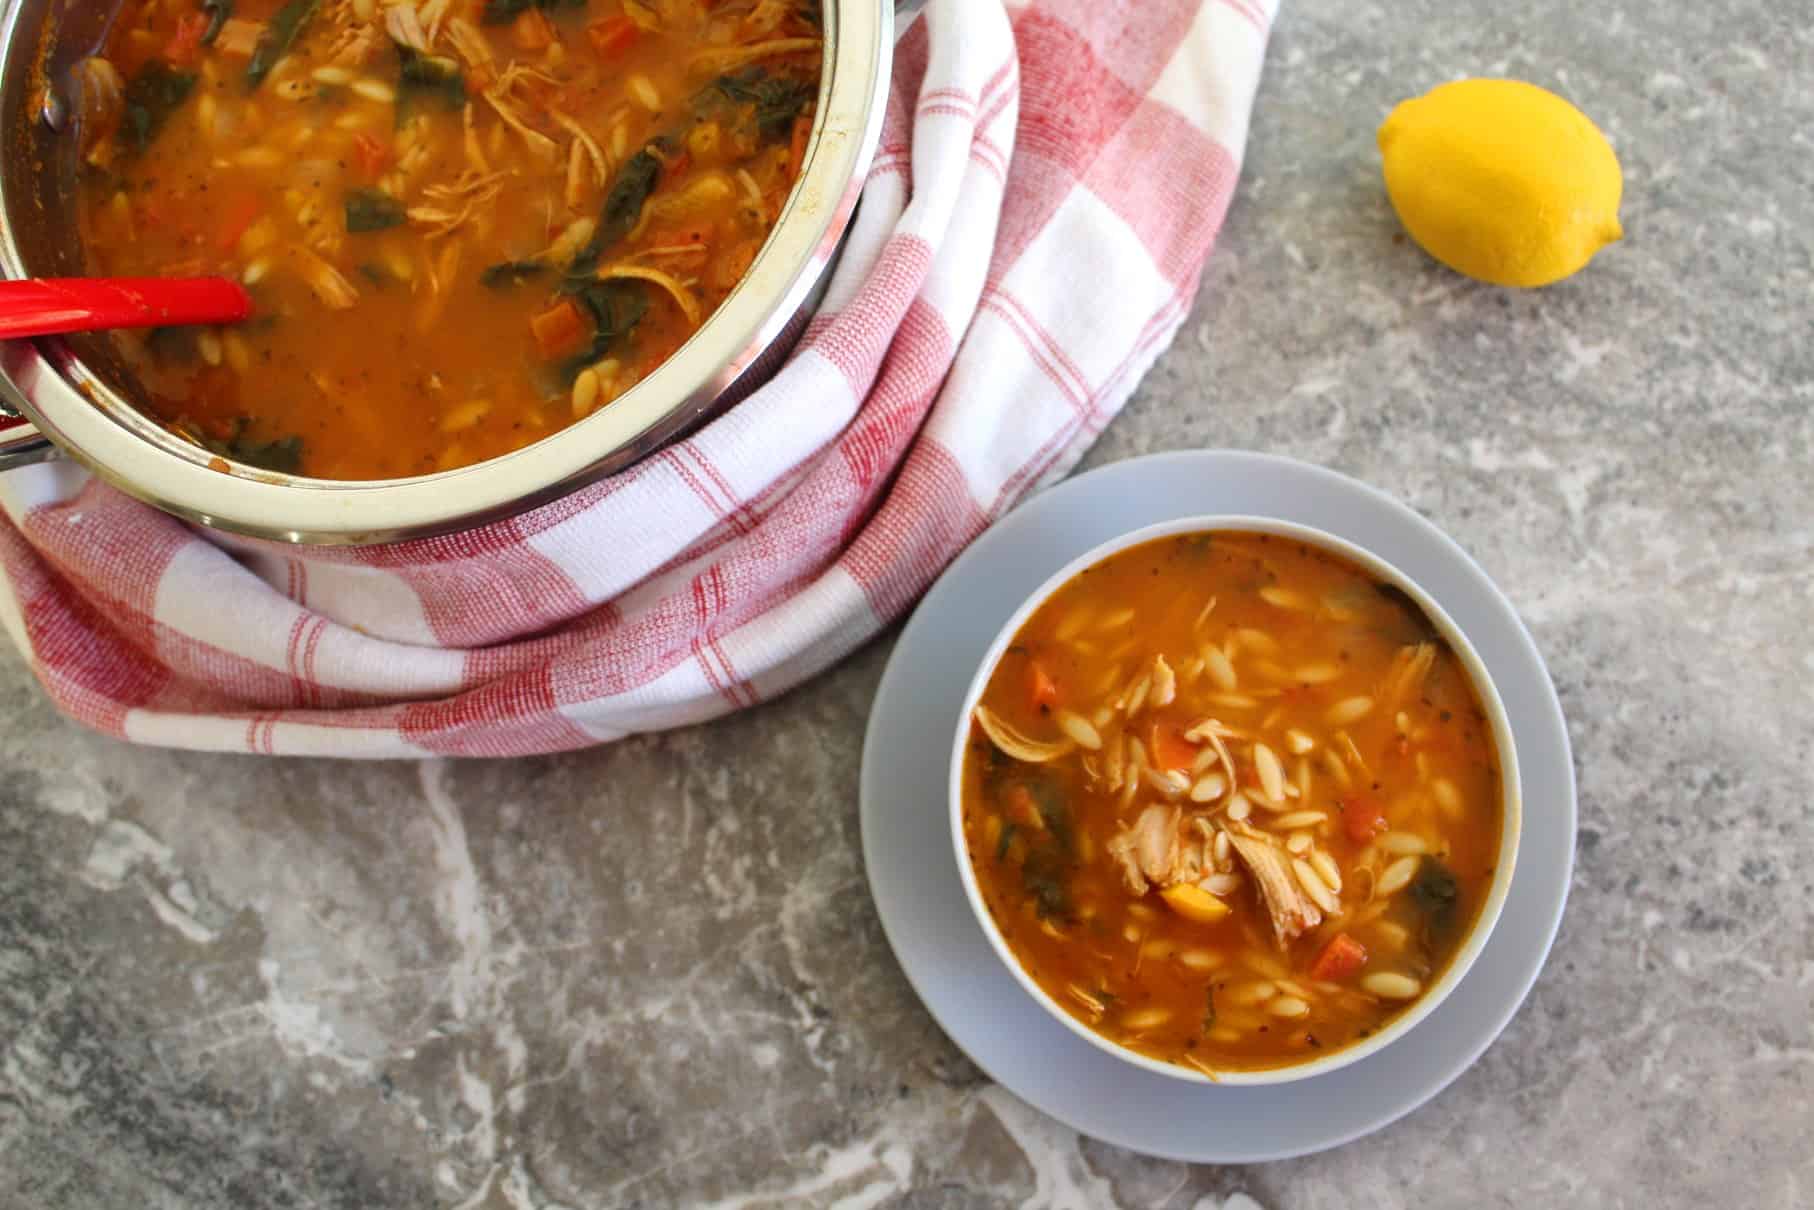 Orzo soup with shredded turkey and spinach!! Picture shows a bowl of the soup already served, the pot where it was cooked with a ladle in and a lemon on the other side.